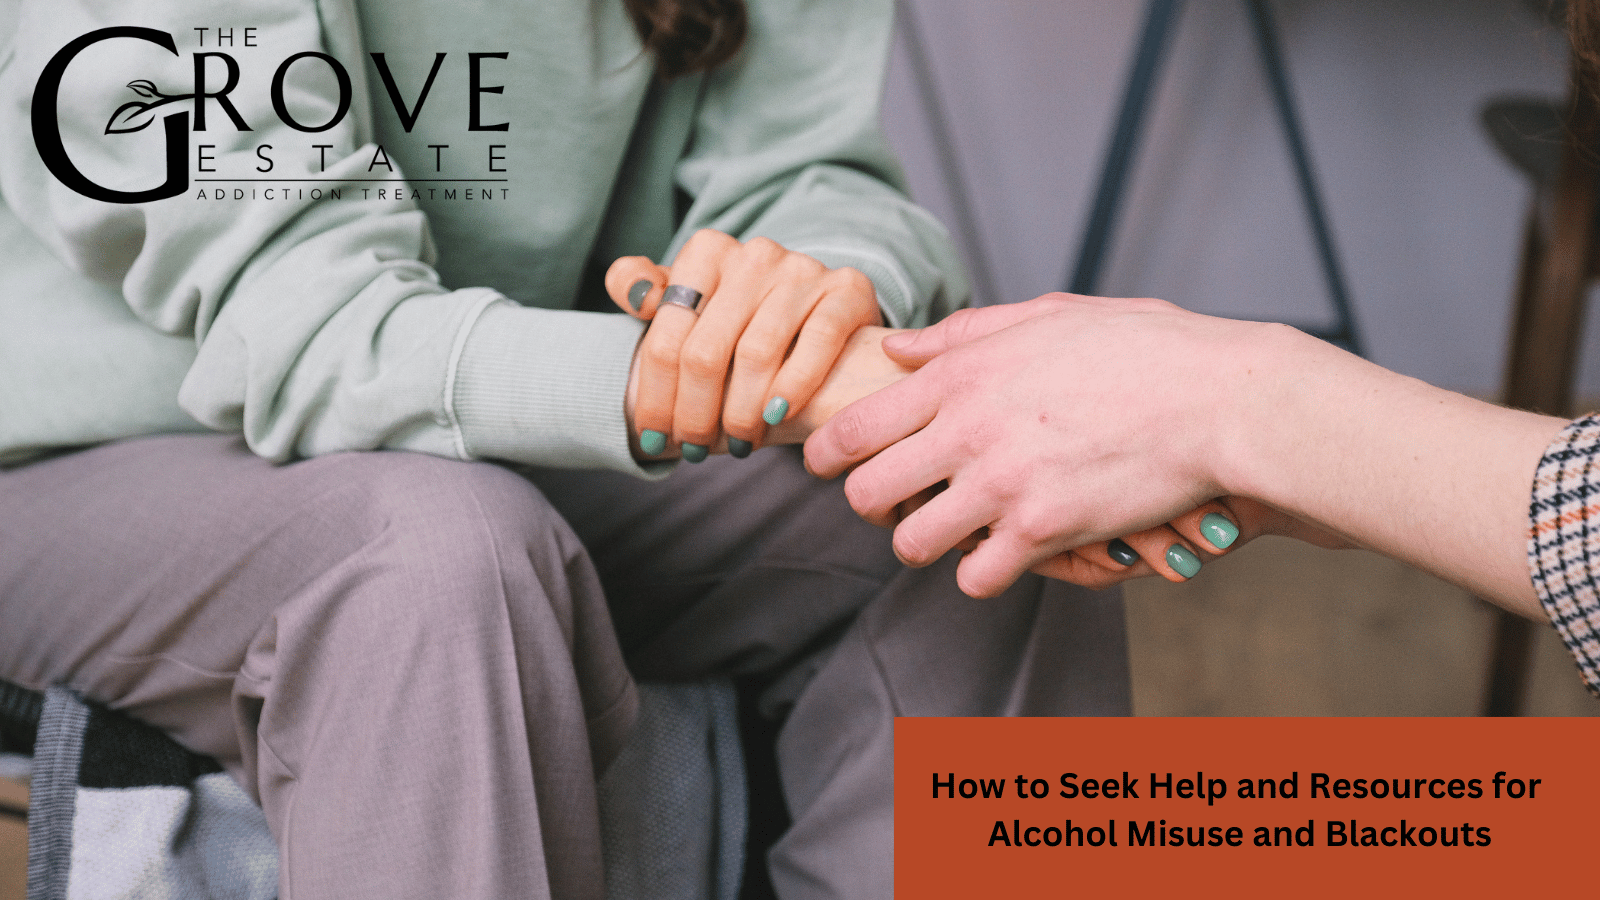 How to Seek Help and Resources for Alcohol Misuse and Blackouts